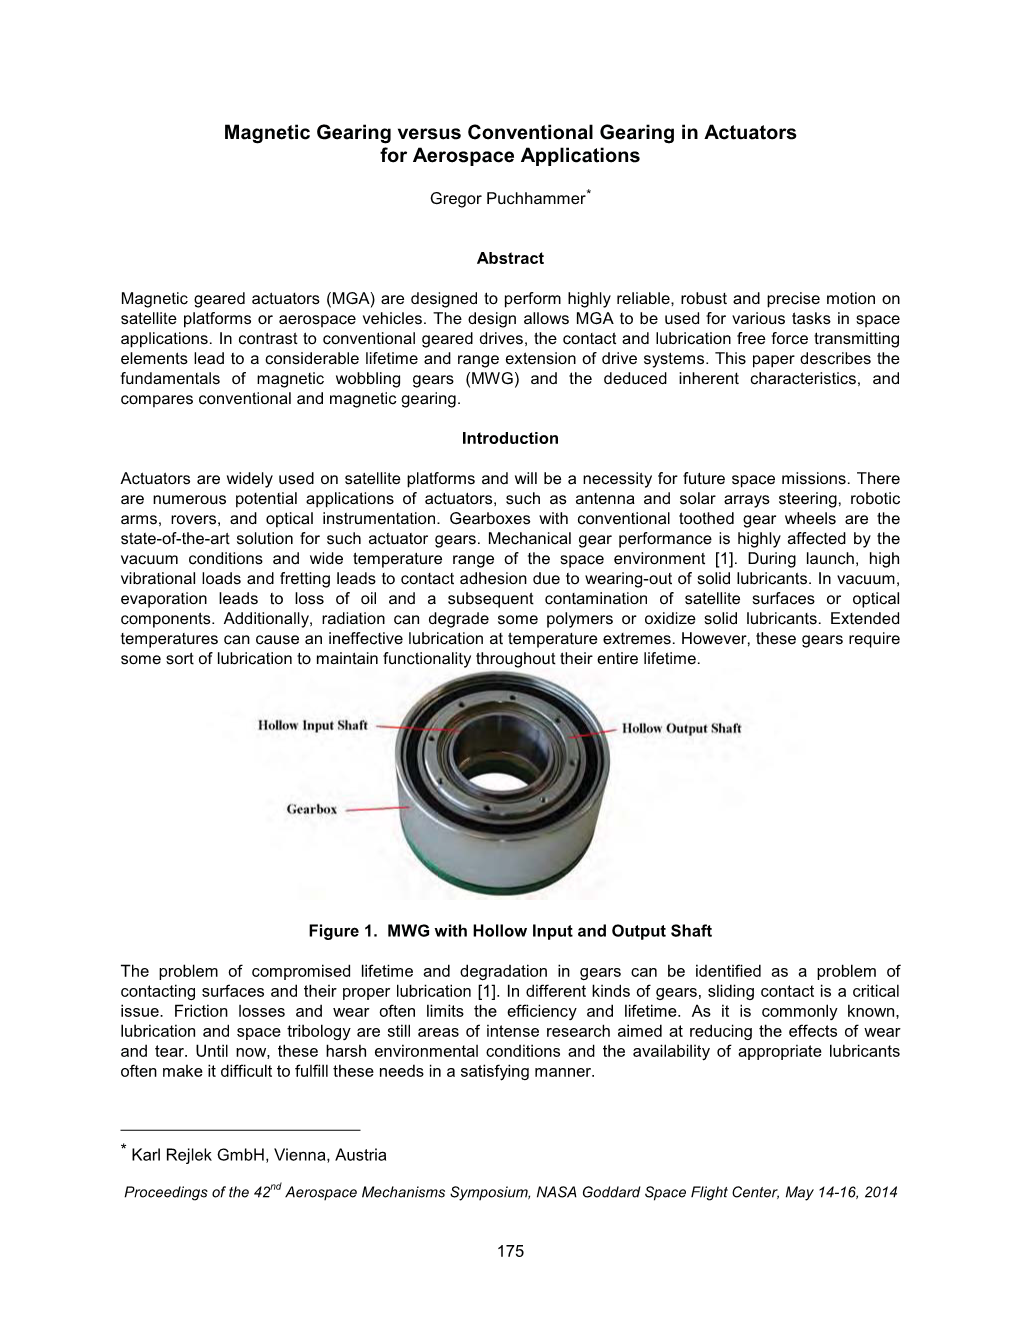 Magnetic Gearing Versus Conventional Gearing in Actuators for Aerospace Applications